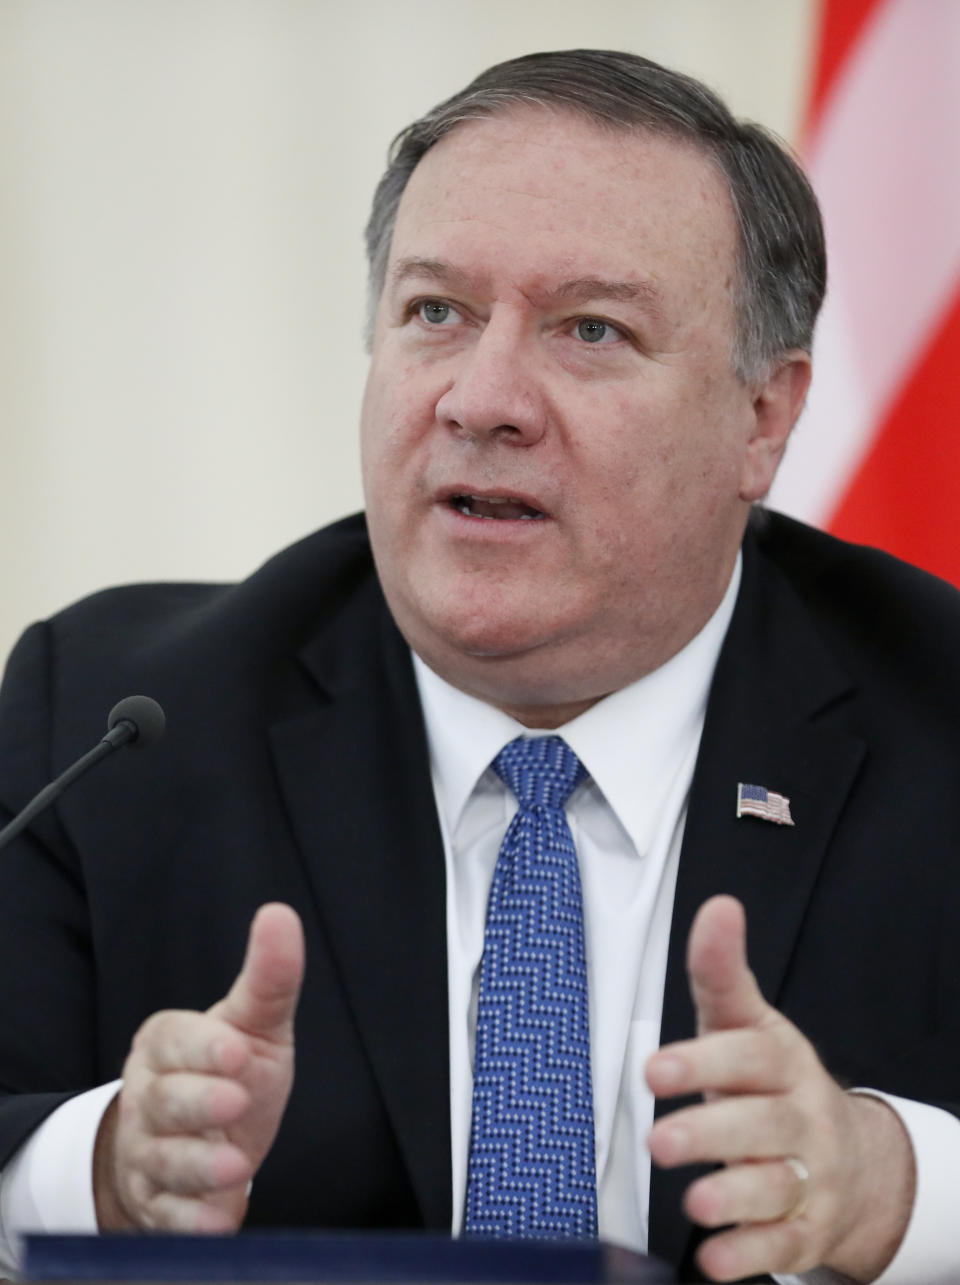 U.S. Secretary of State Mike Pompeo gestures while speaking during his and Russian Foreign Minister Sergey Lavrov joint news conference following the talks in the Black Sea resort city of Sochi, southern Russia, Tuesday, May 14, 2019. Pompeo's first trip to Russia starts Tuesday in Sochi, where he and Russian Foreign Minister Sergey Lavrov are sitting down for talks and then having a joint meeting with President Vladimir Putin. (AP Photo/Pavel Golovkin, Pool)